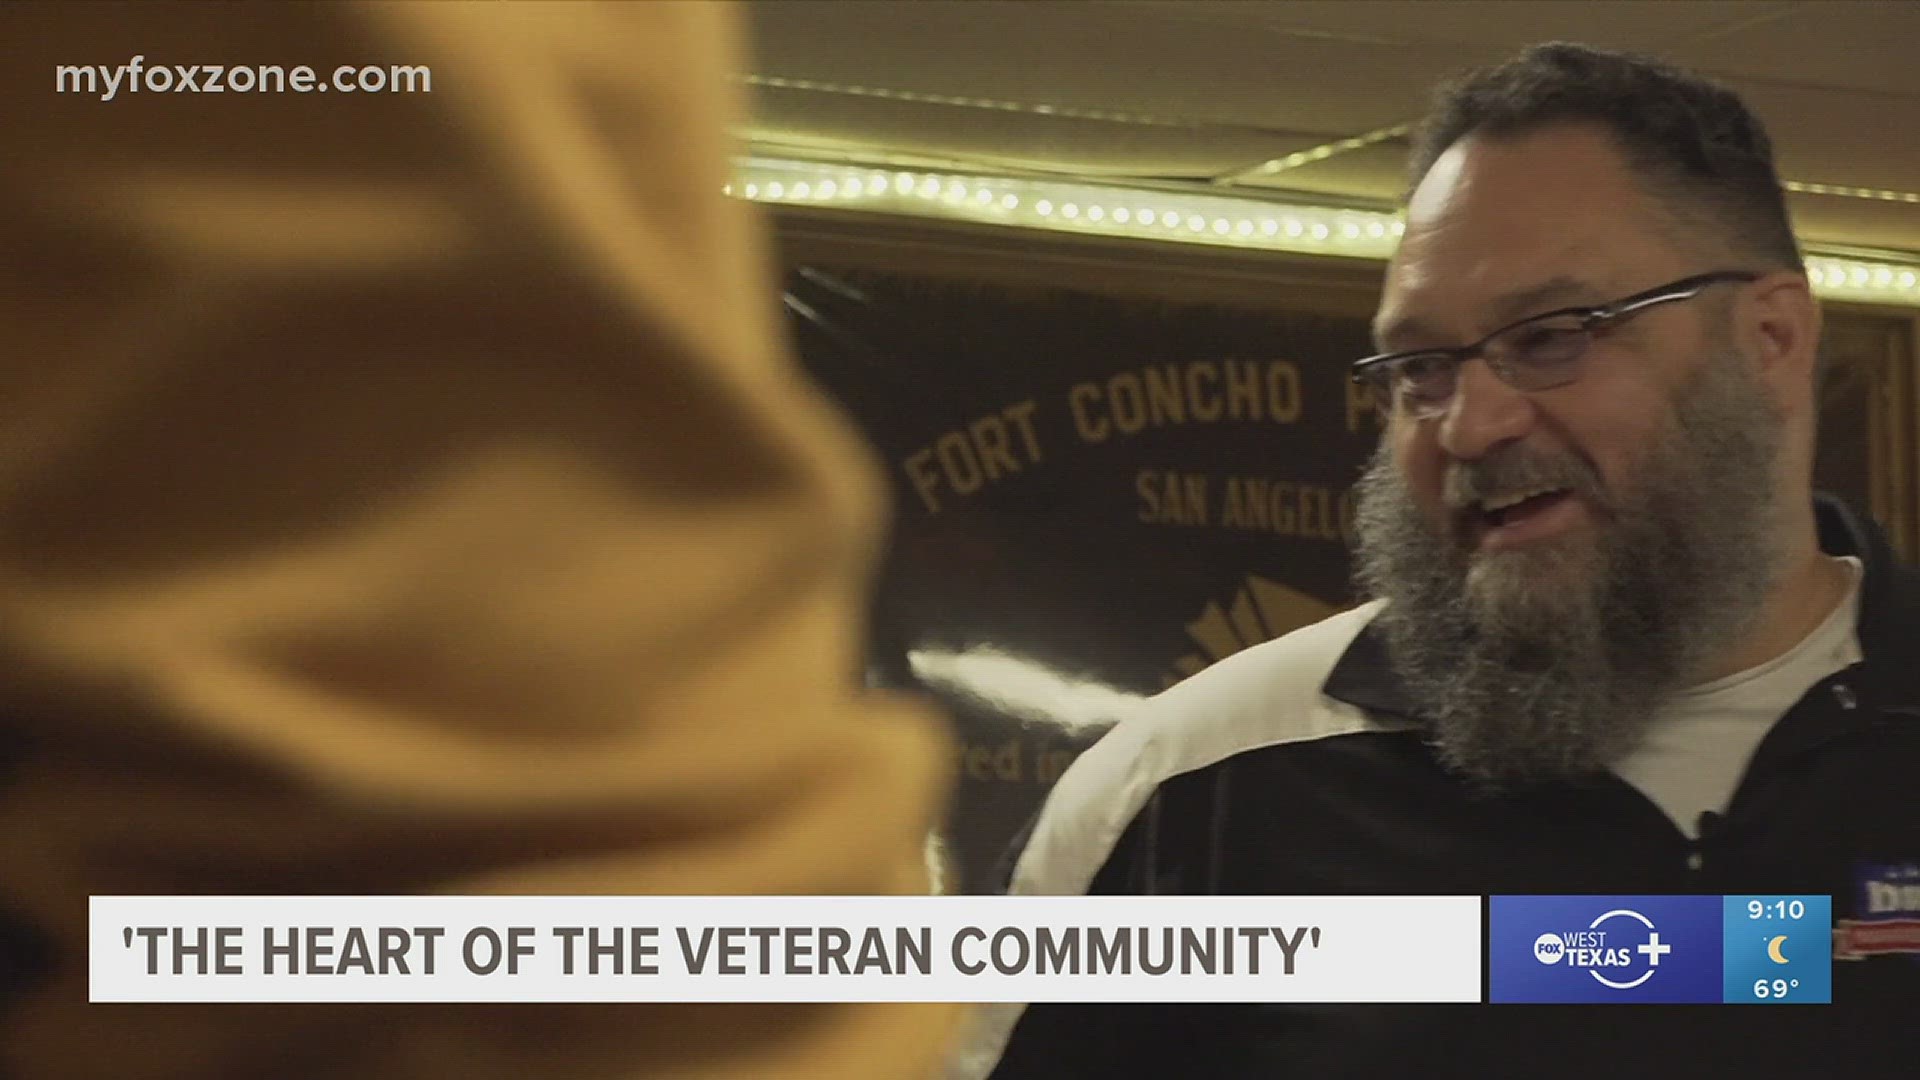 For years, Luis Martinez has been working to change the lives of veterans in San Angelo and beyond.